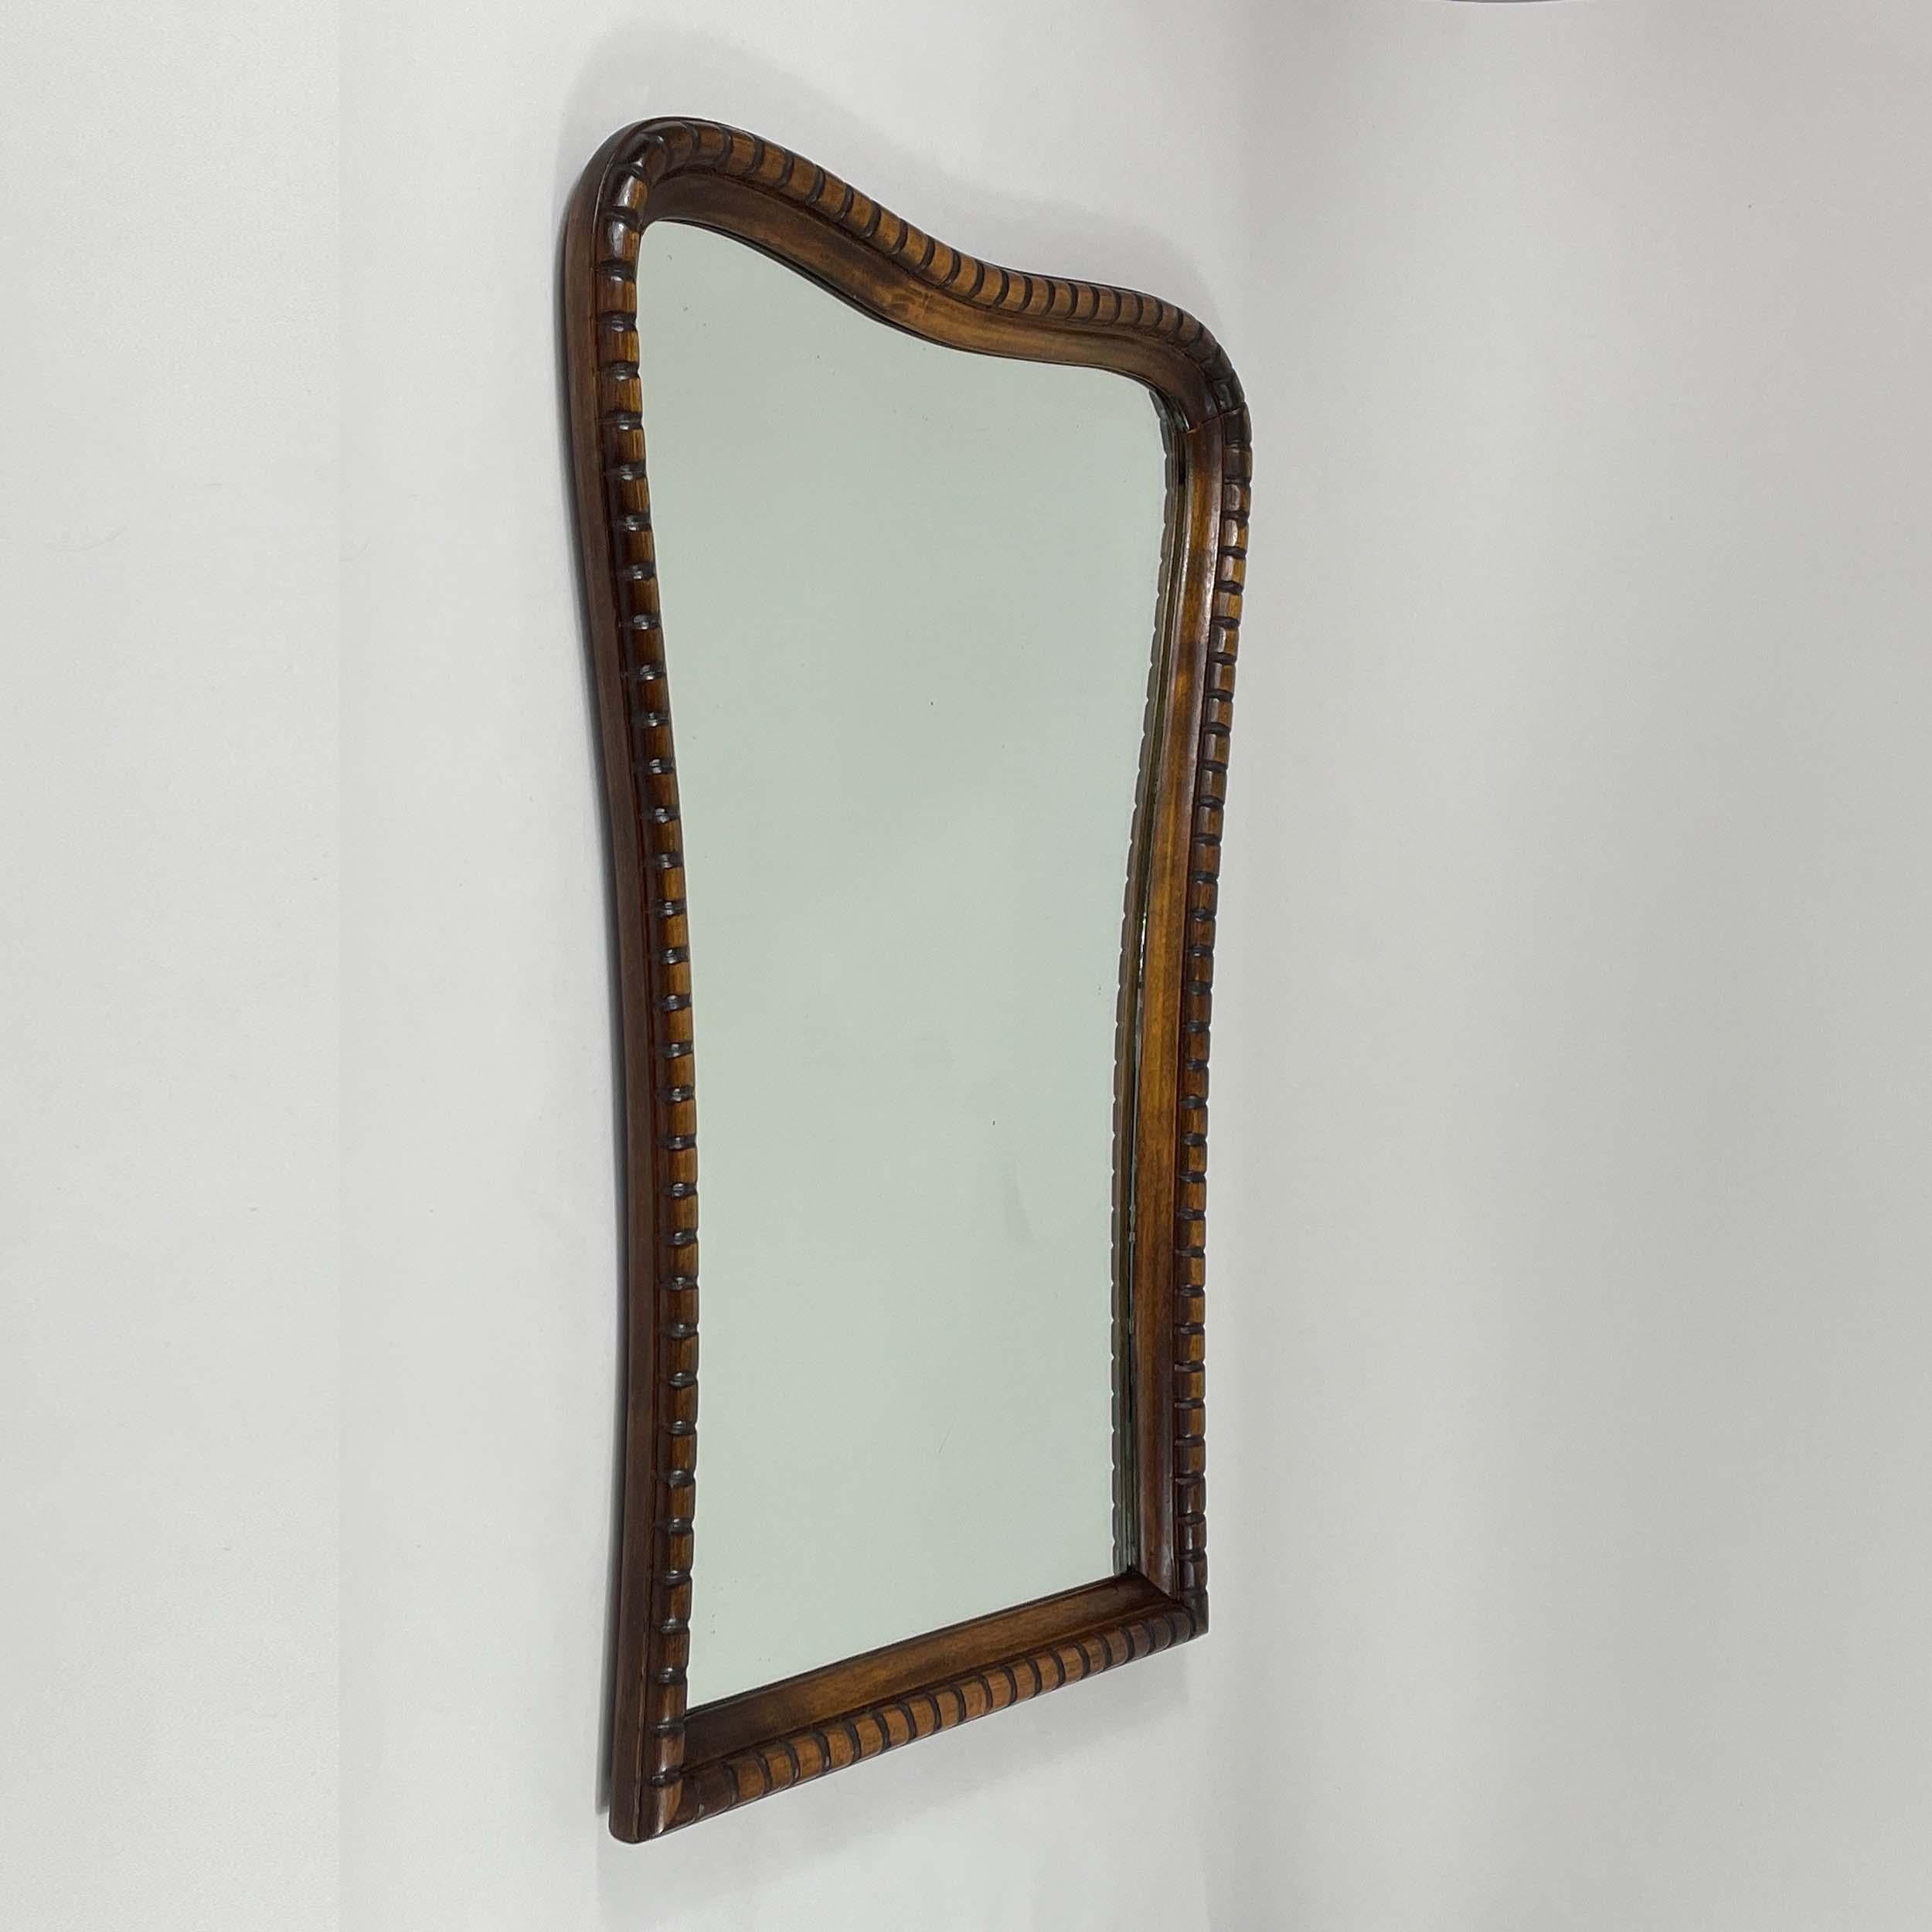 This large and heavy wall mirror was designed and manufactured in Italy in the 1940s. It features a hand carved stained oak frame and mirror glass.

Overall condition is very good, with a nice warm vintage patina to the frame and some wear to the